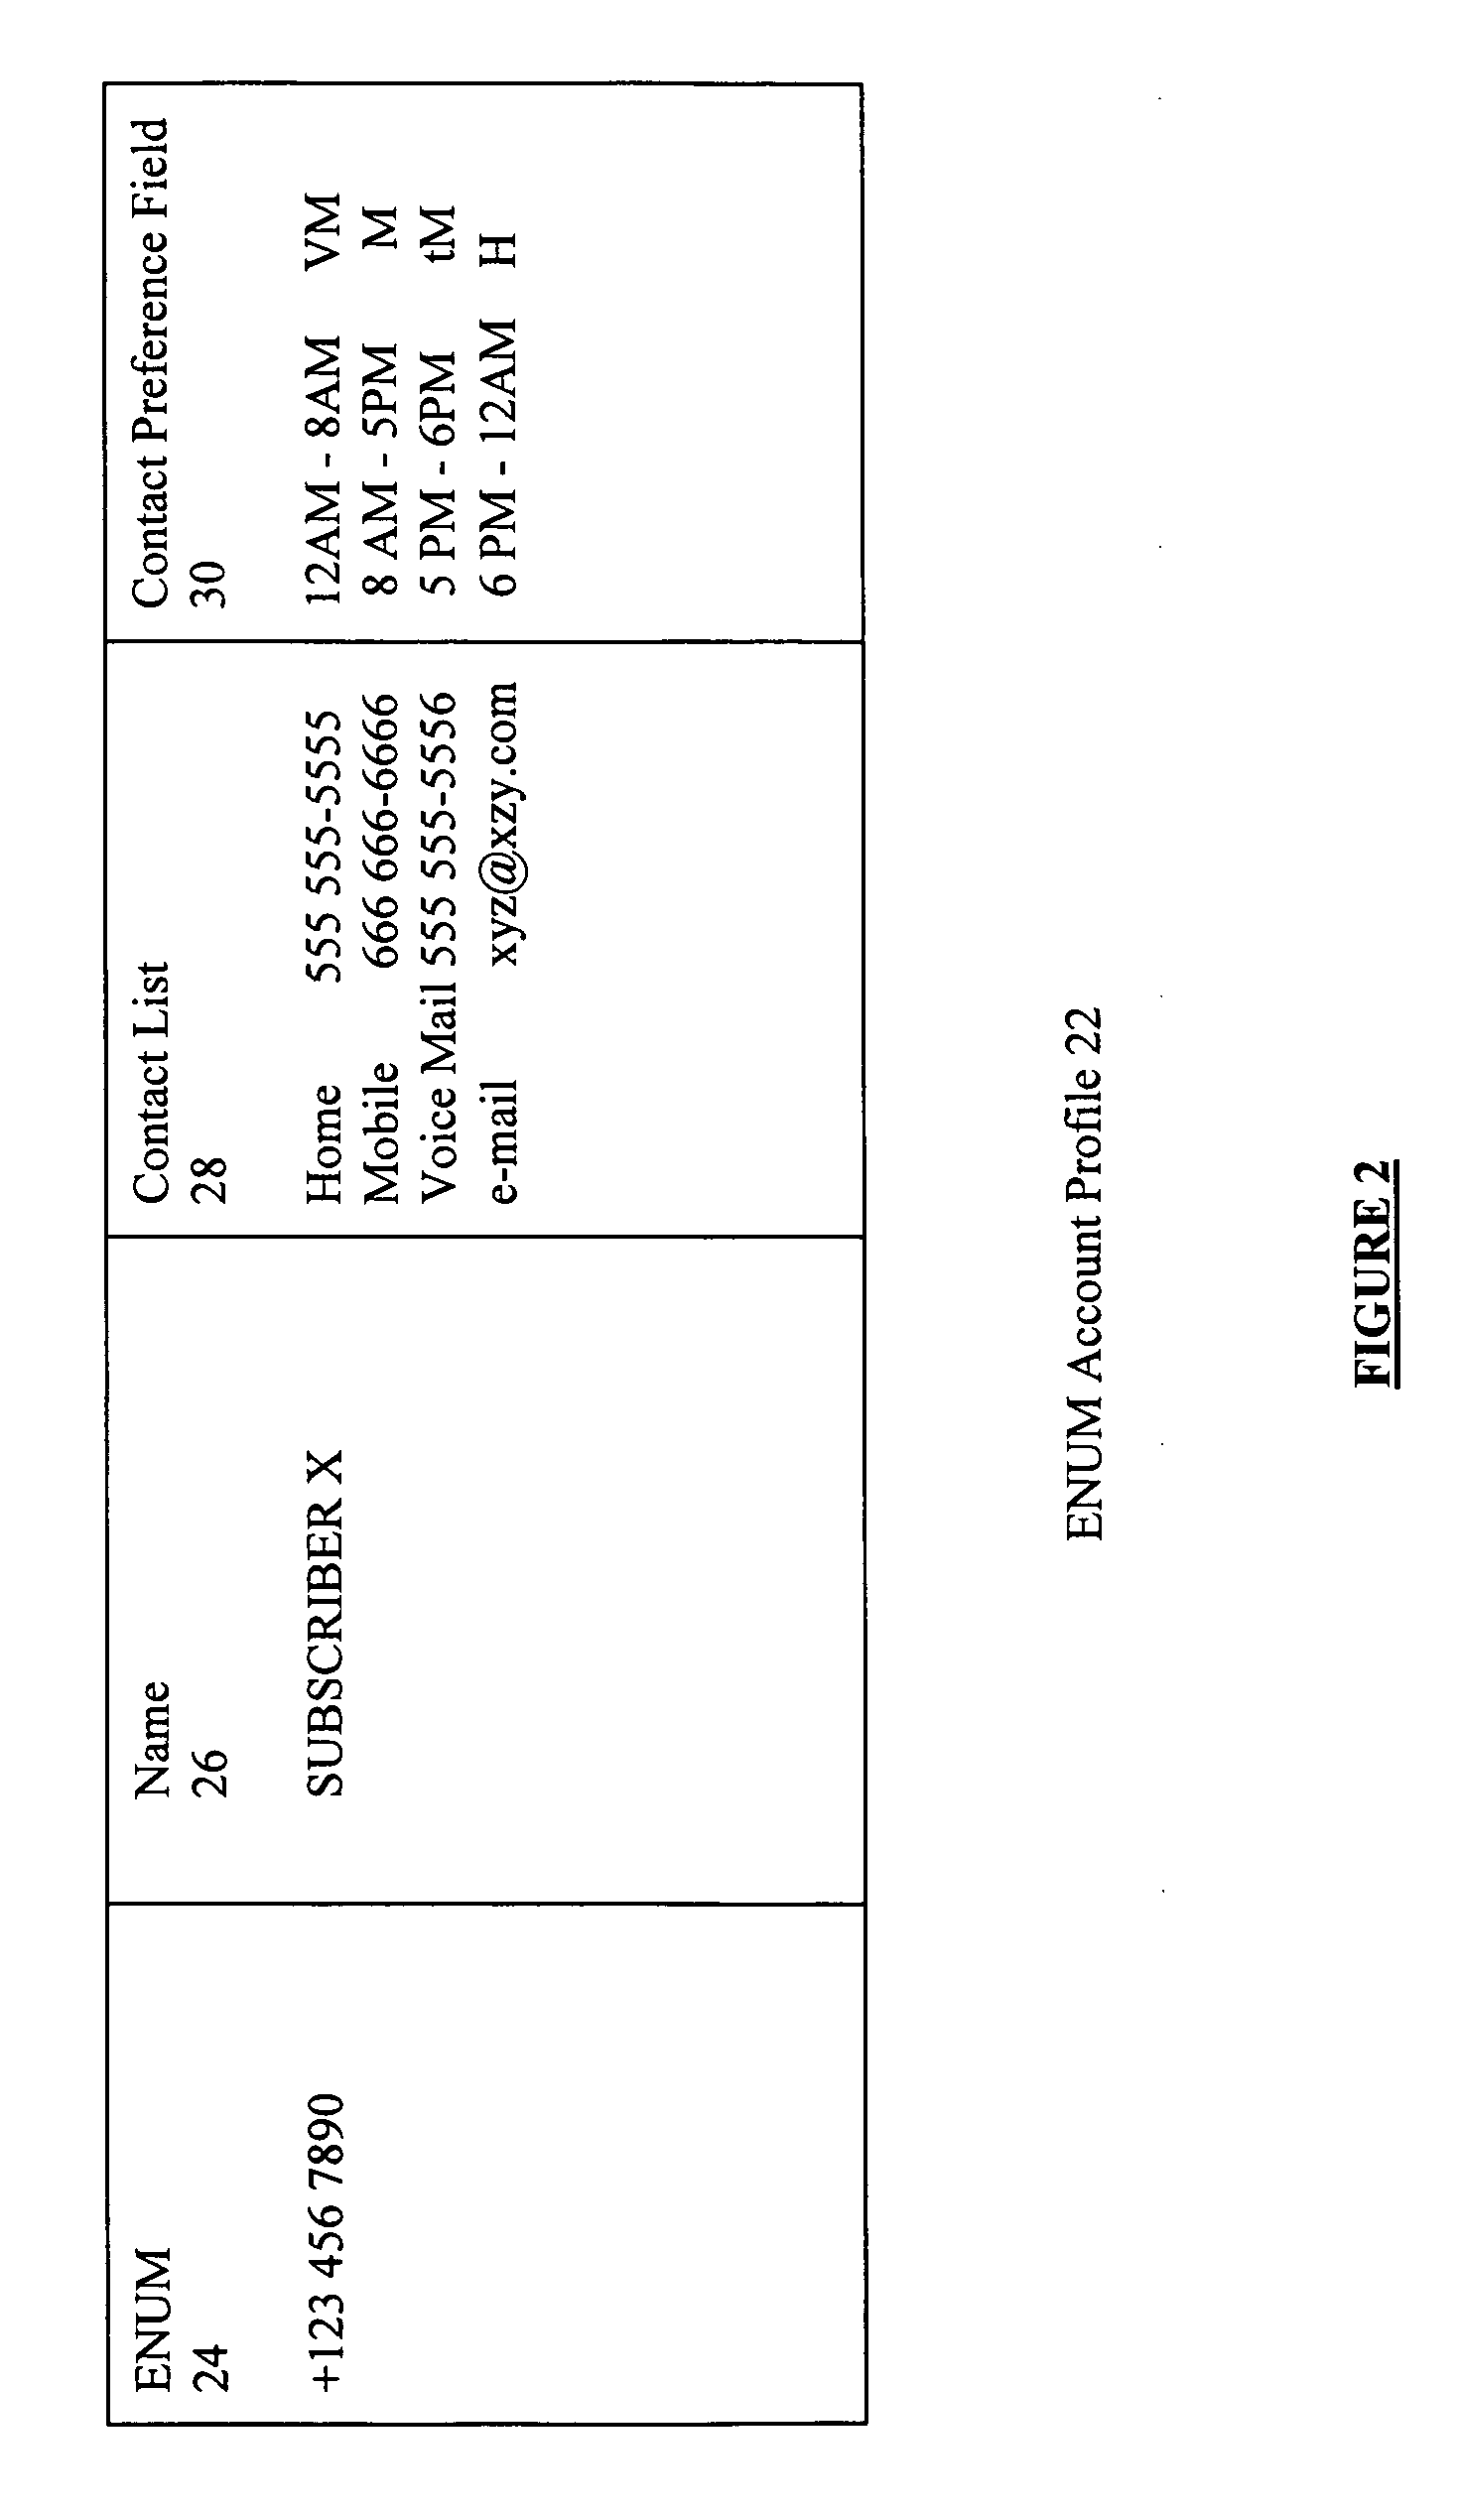 Enhanced directory assistance system with ENUM based features